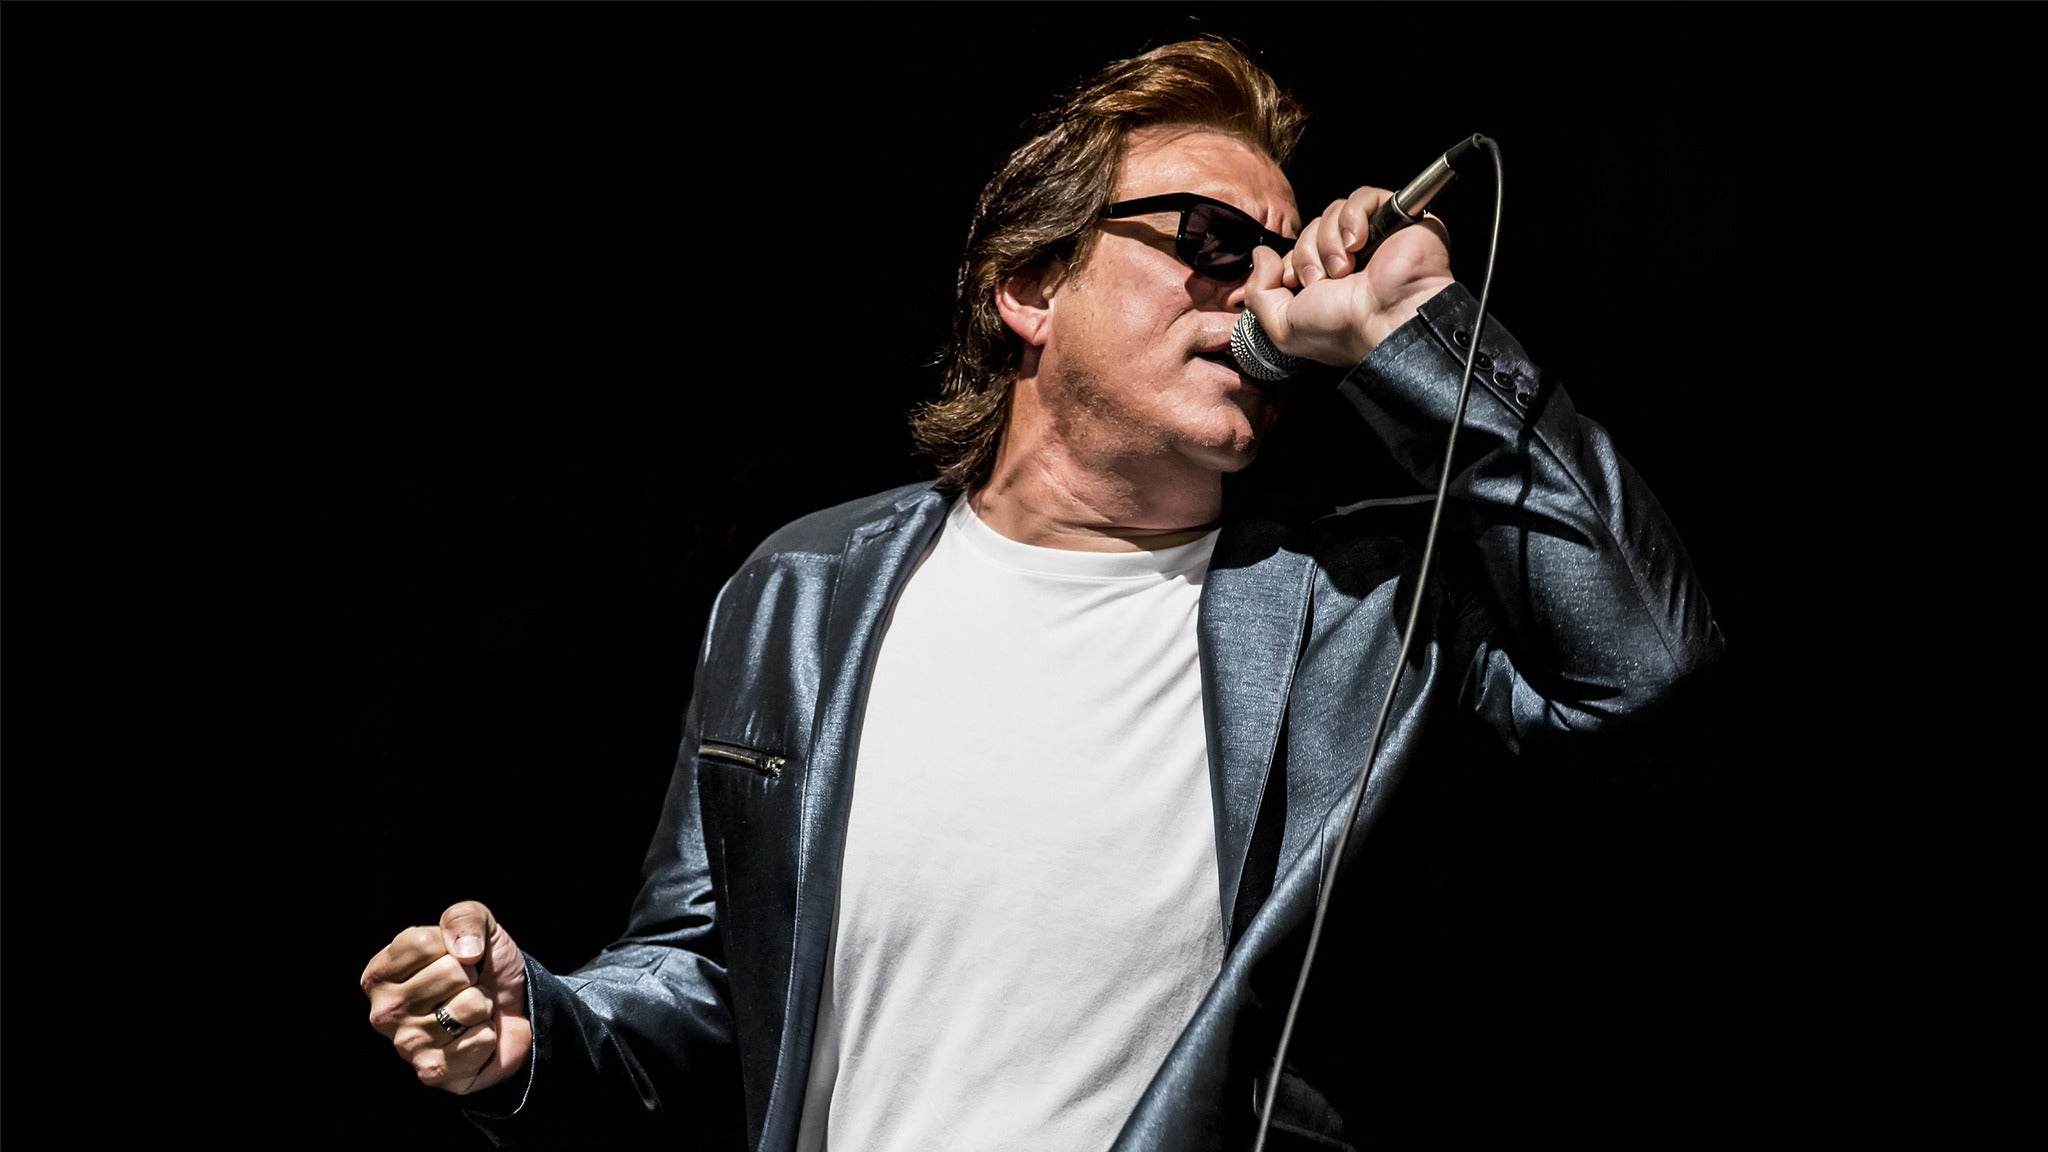 The Heart Of Rock & Roll - A Tribute To Huey Lewis and the News in Costa Mesa promo photo for Hangar presale offer code